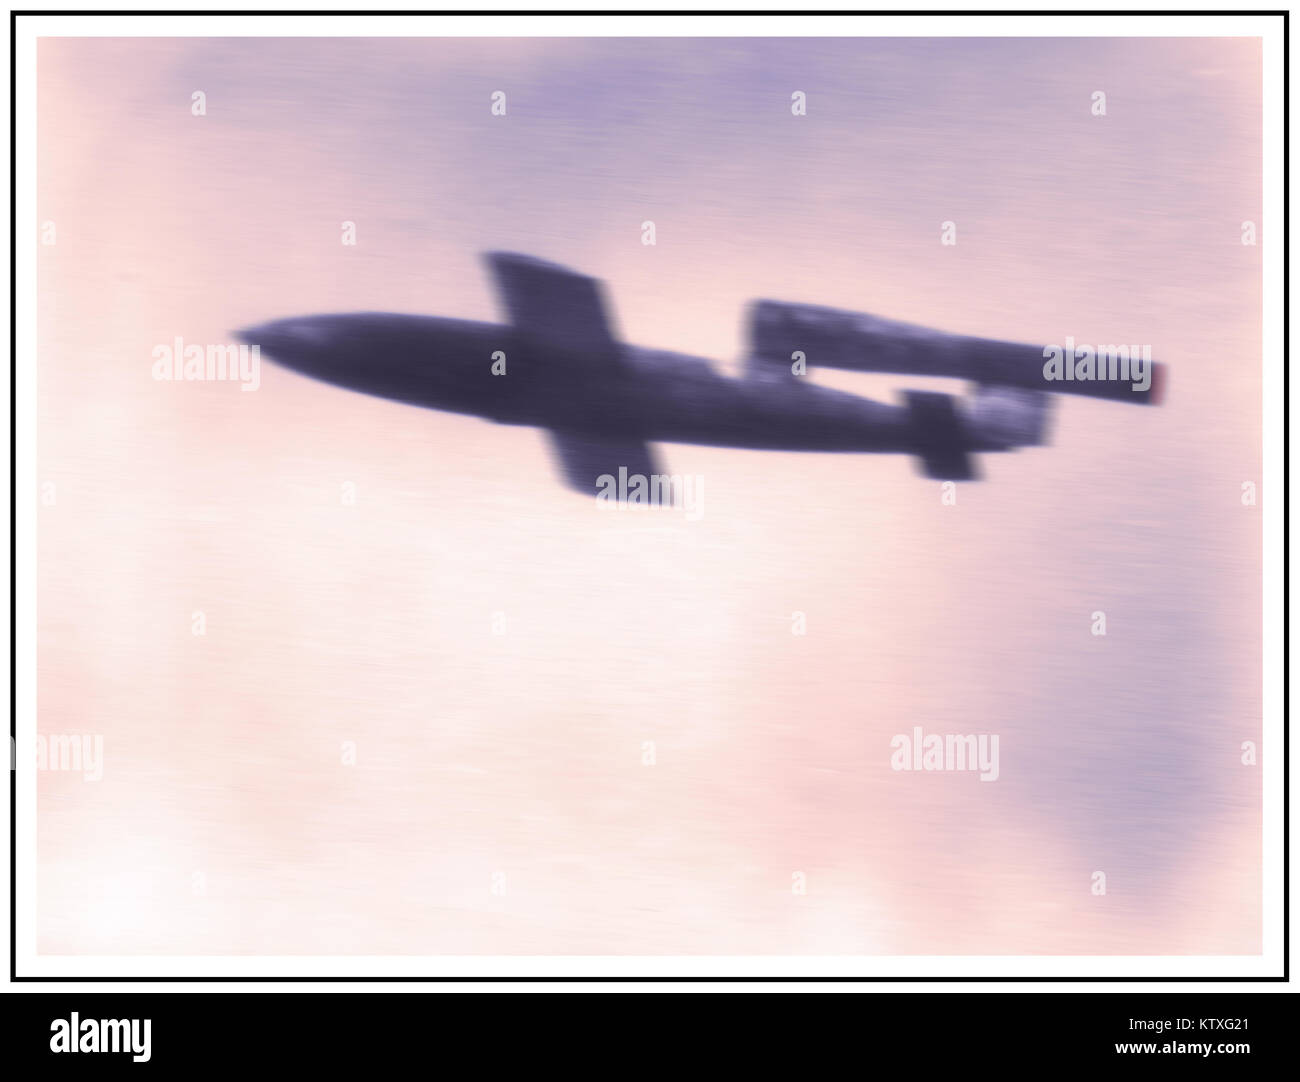 V-1 Flying bomb 1944 indiscriminate terror weapon used by Nazi Germany to bomb civilian London Stock Photo